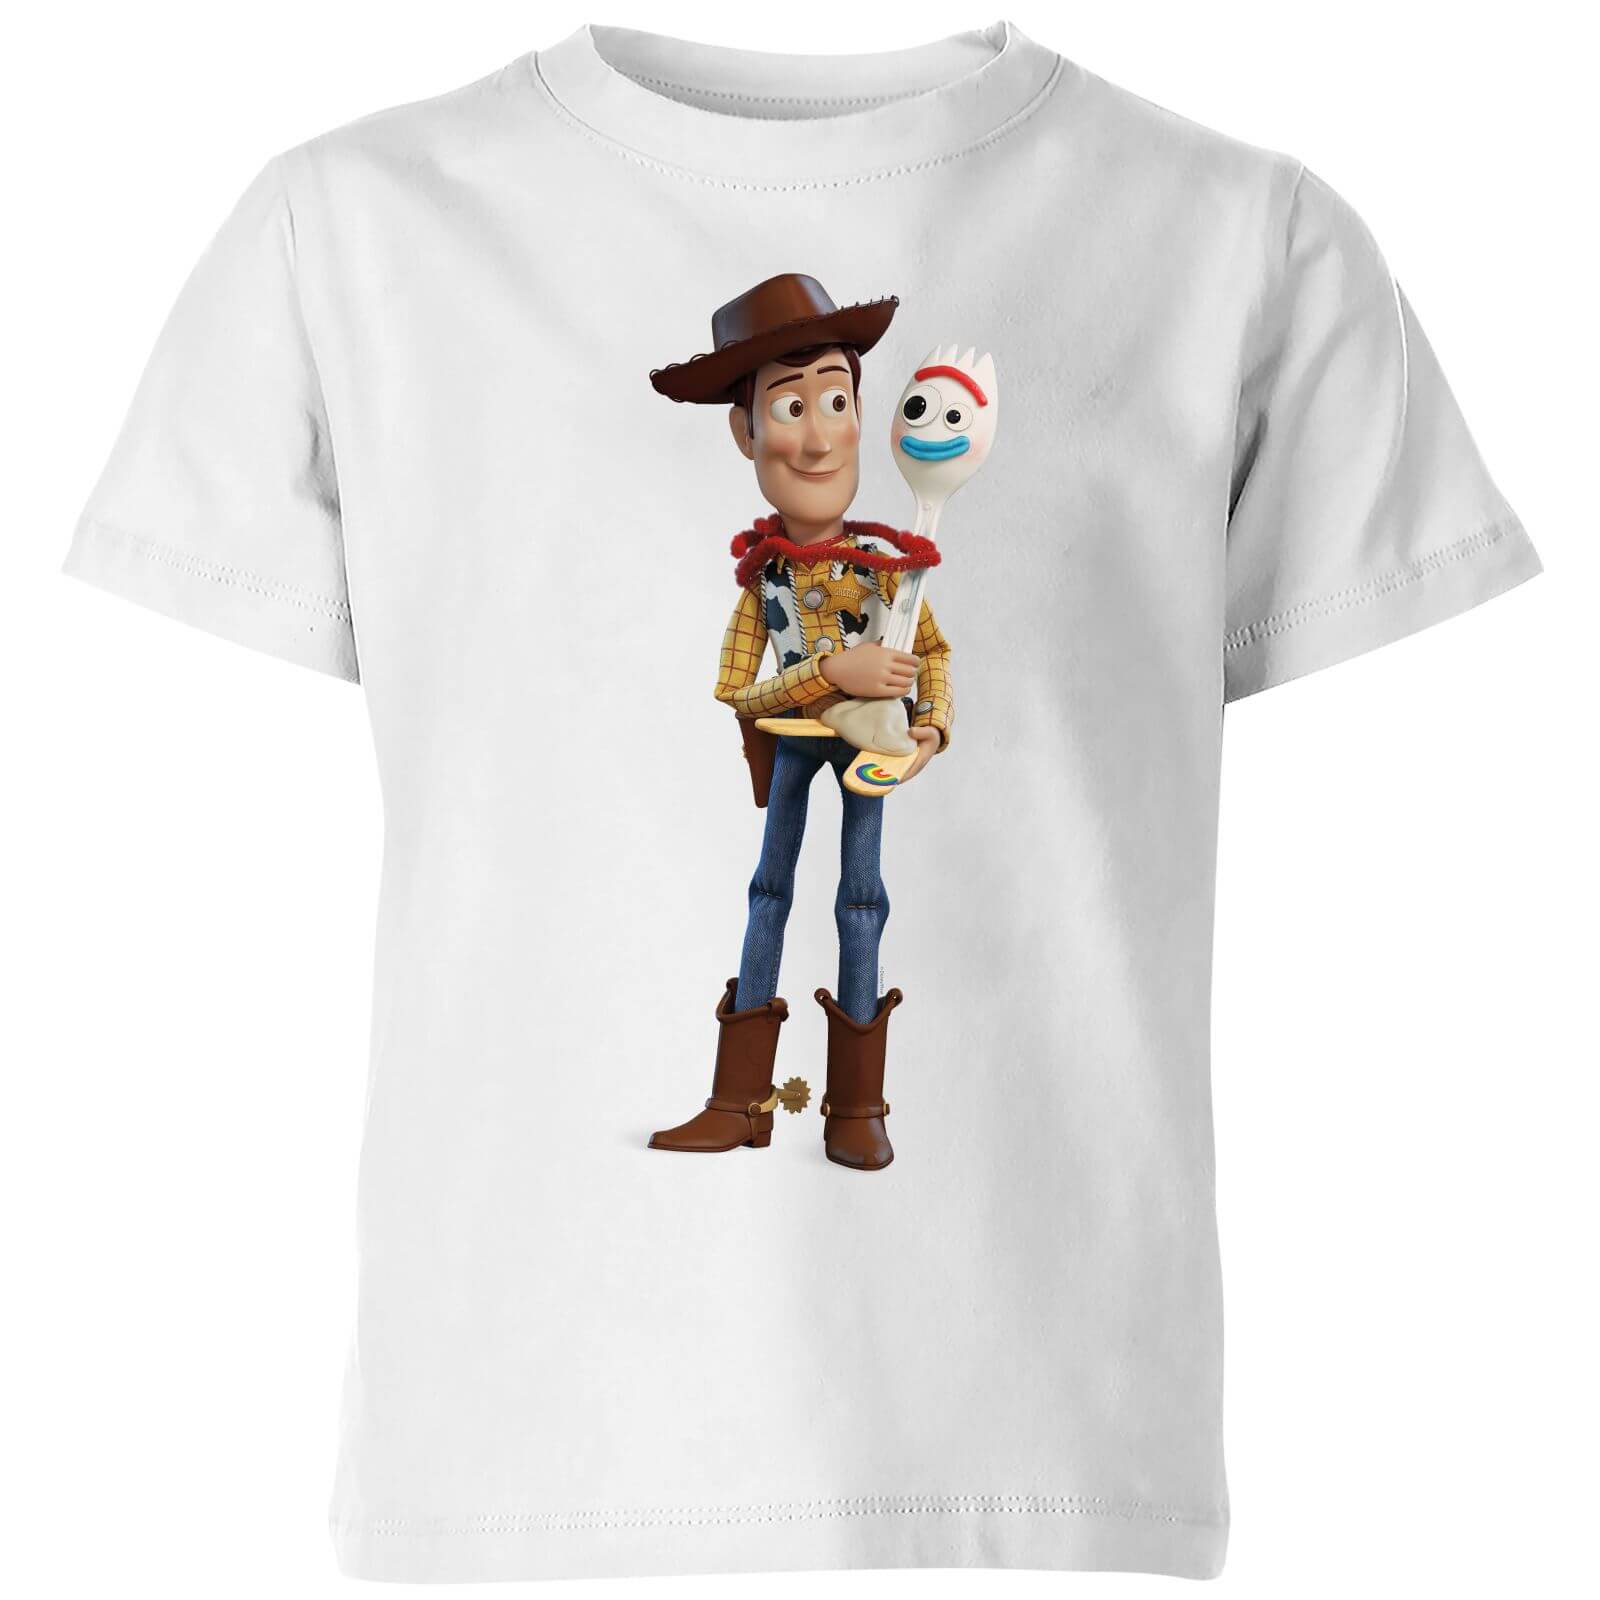 Toy Story 4 Woody And Forky Kids' T-Shirt - White - 3-4 Years